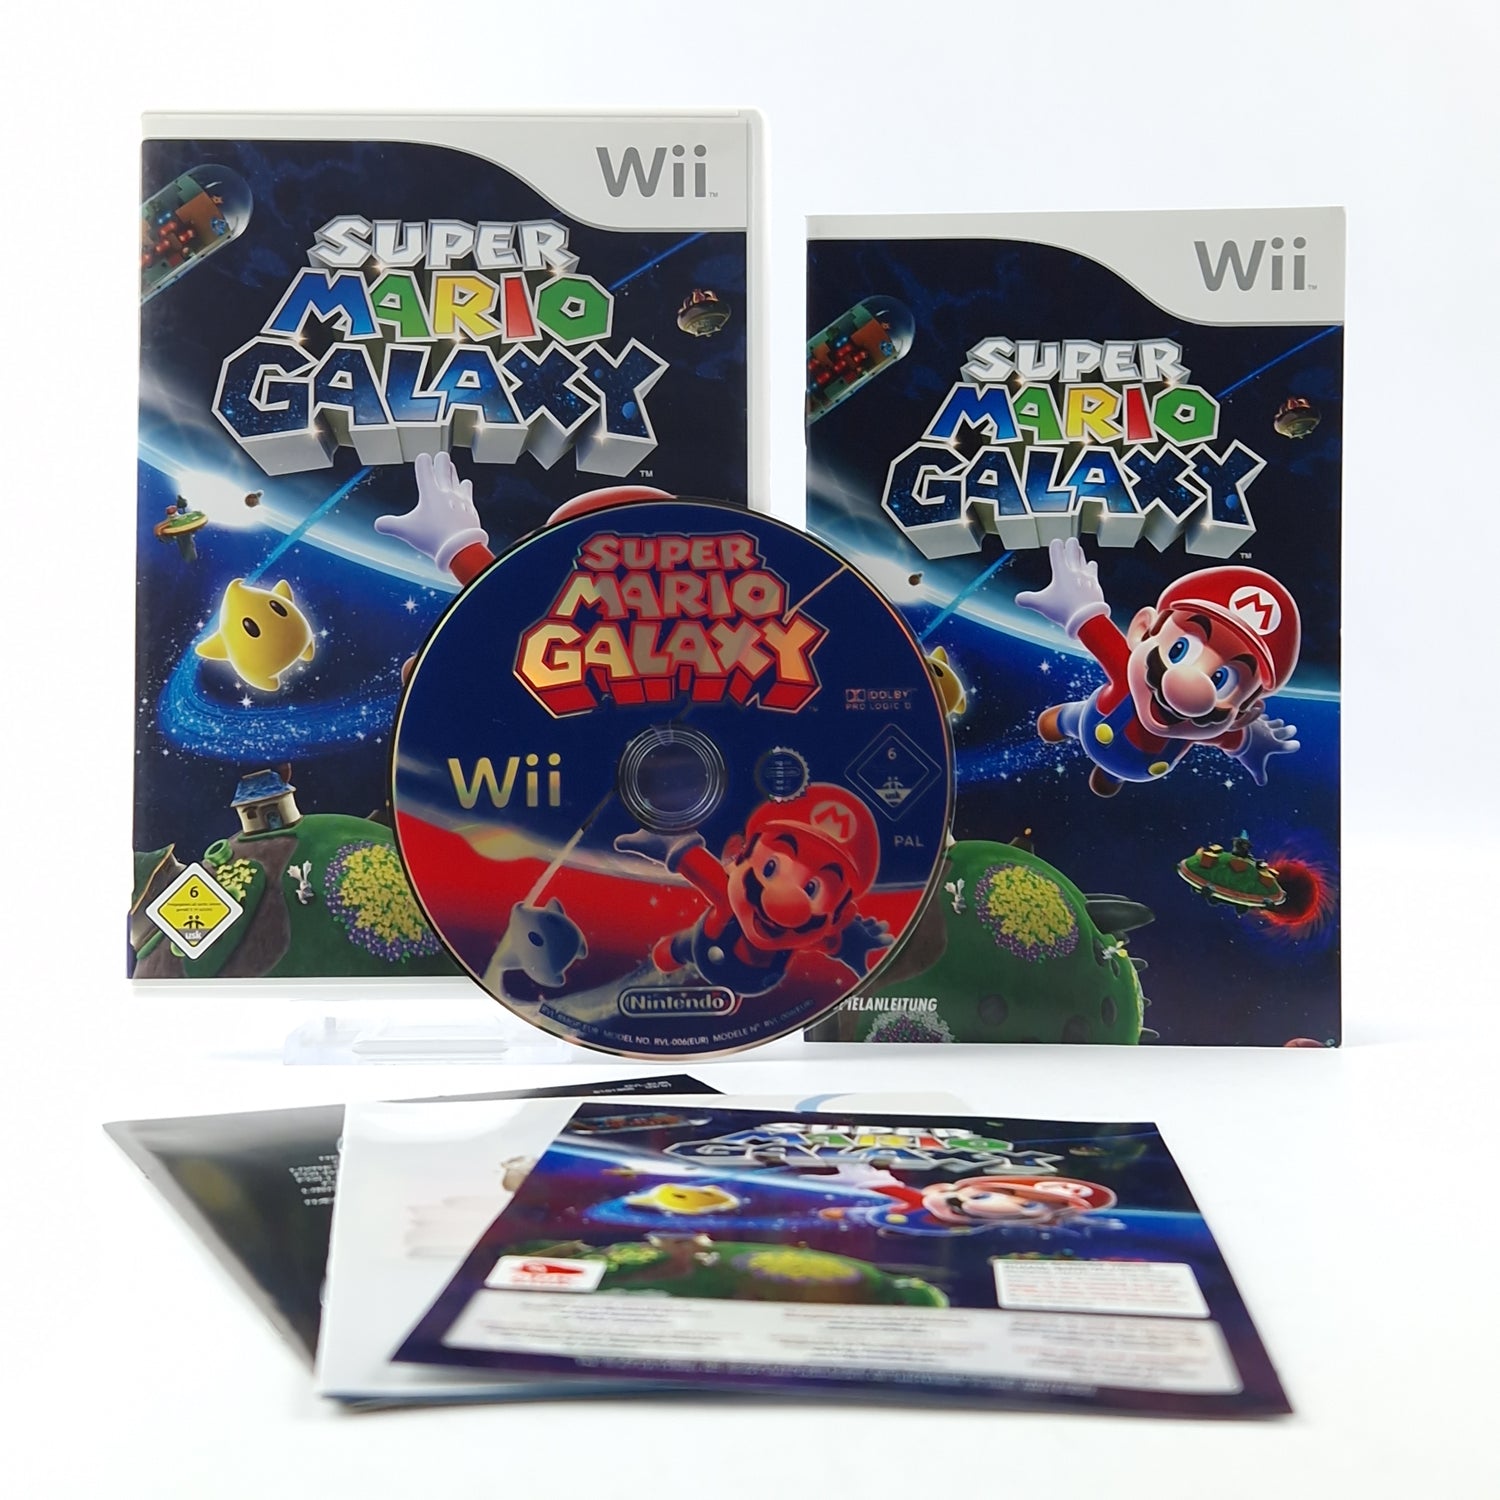 Nintendo Wii game: Super Mario Galaxy - CD DISK instructions OVP / PAL